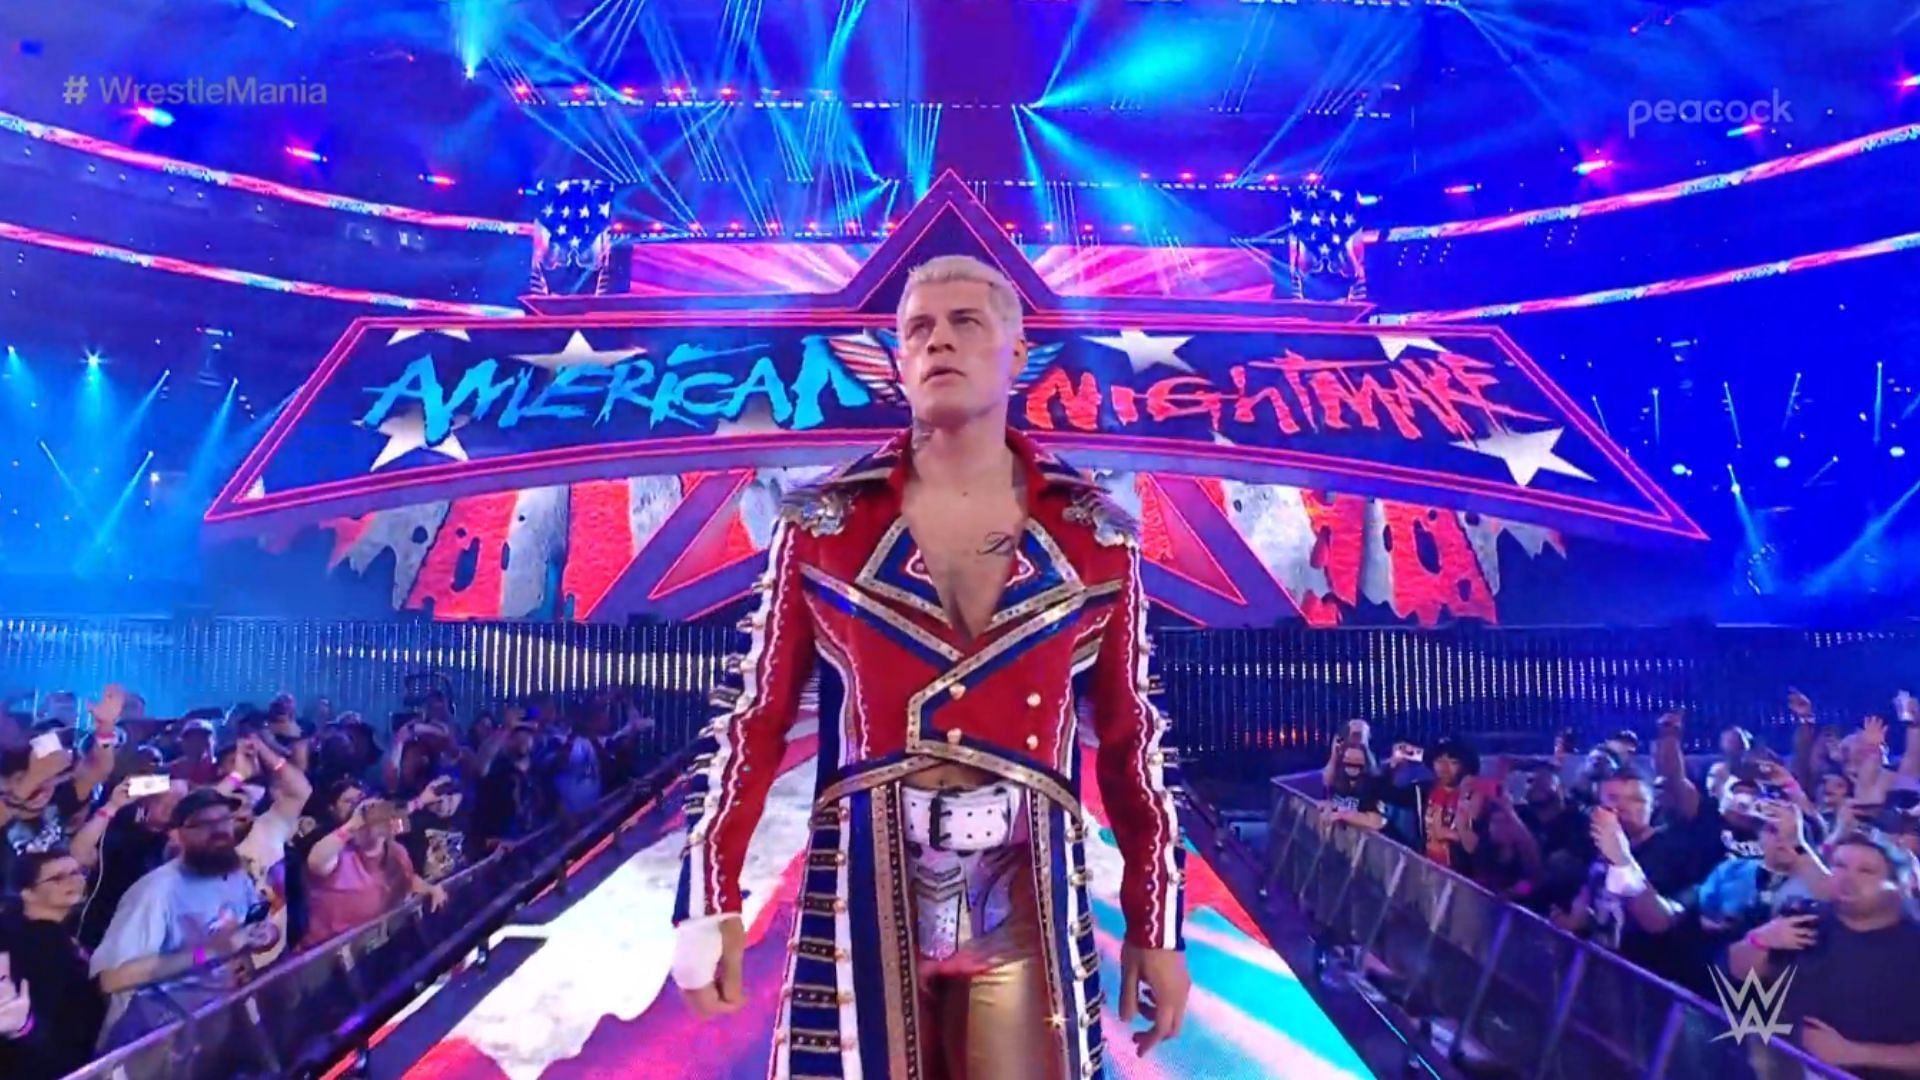 Cody Rhodes made his return to WWE at WrestleMania